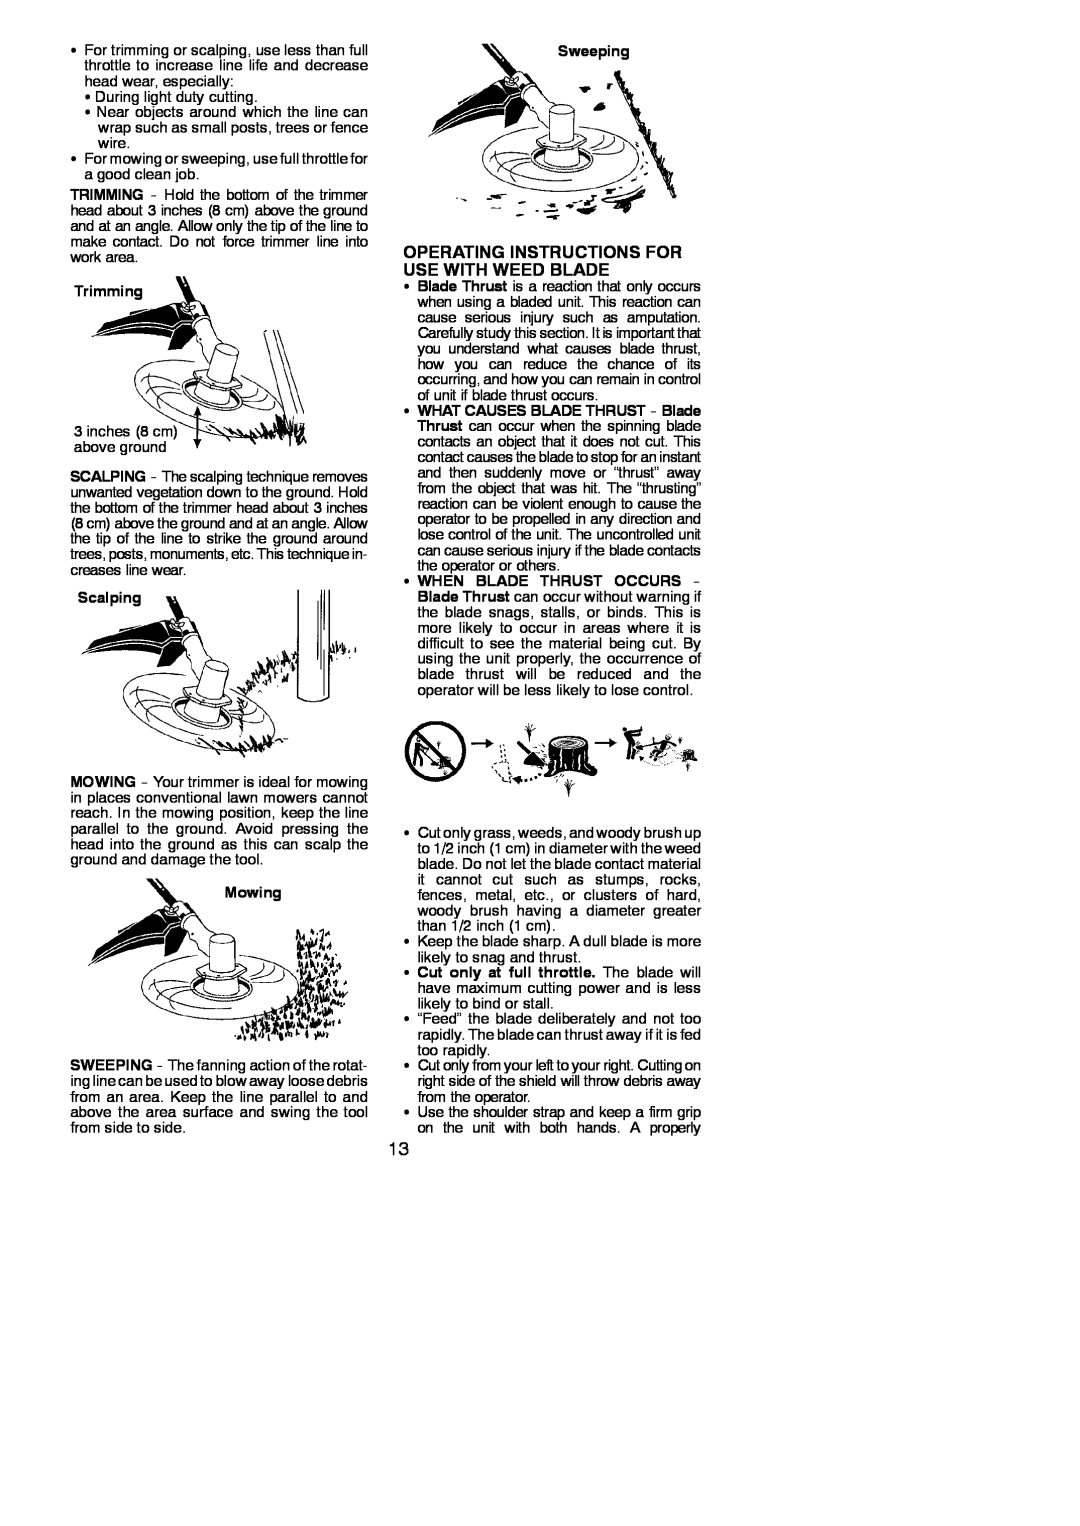 Poulan 545186843 instruction manual Operating Instructions For Use With Weed Blade, Trimming, Scalping, Sweeping, Mowing 